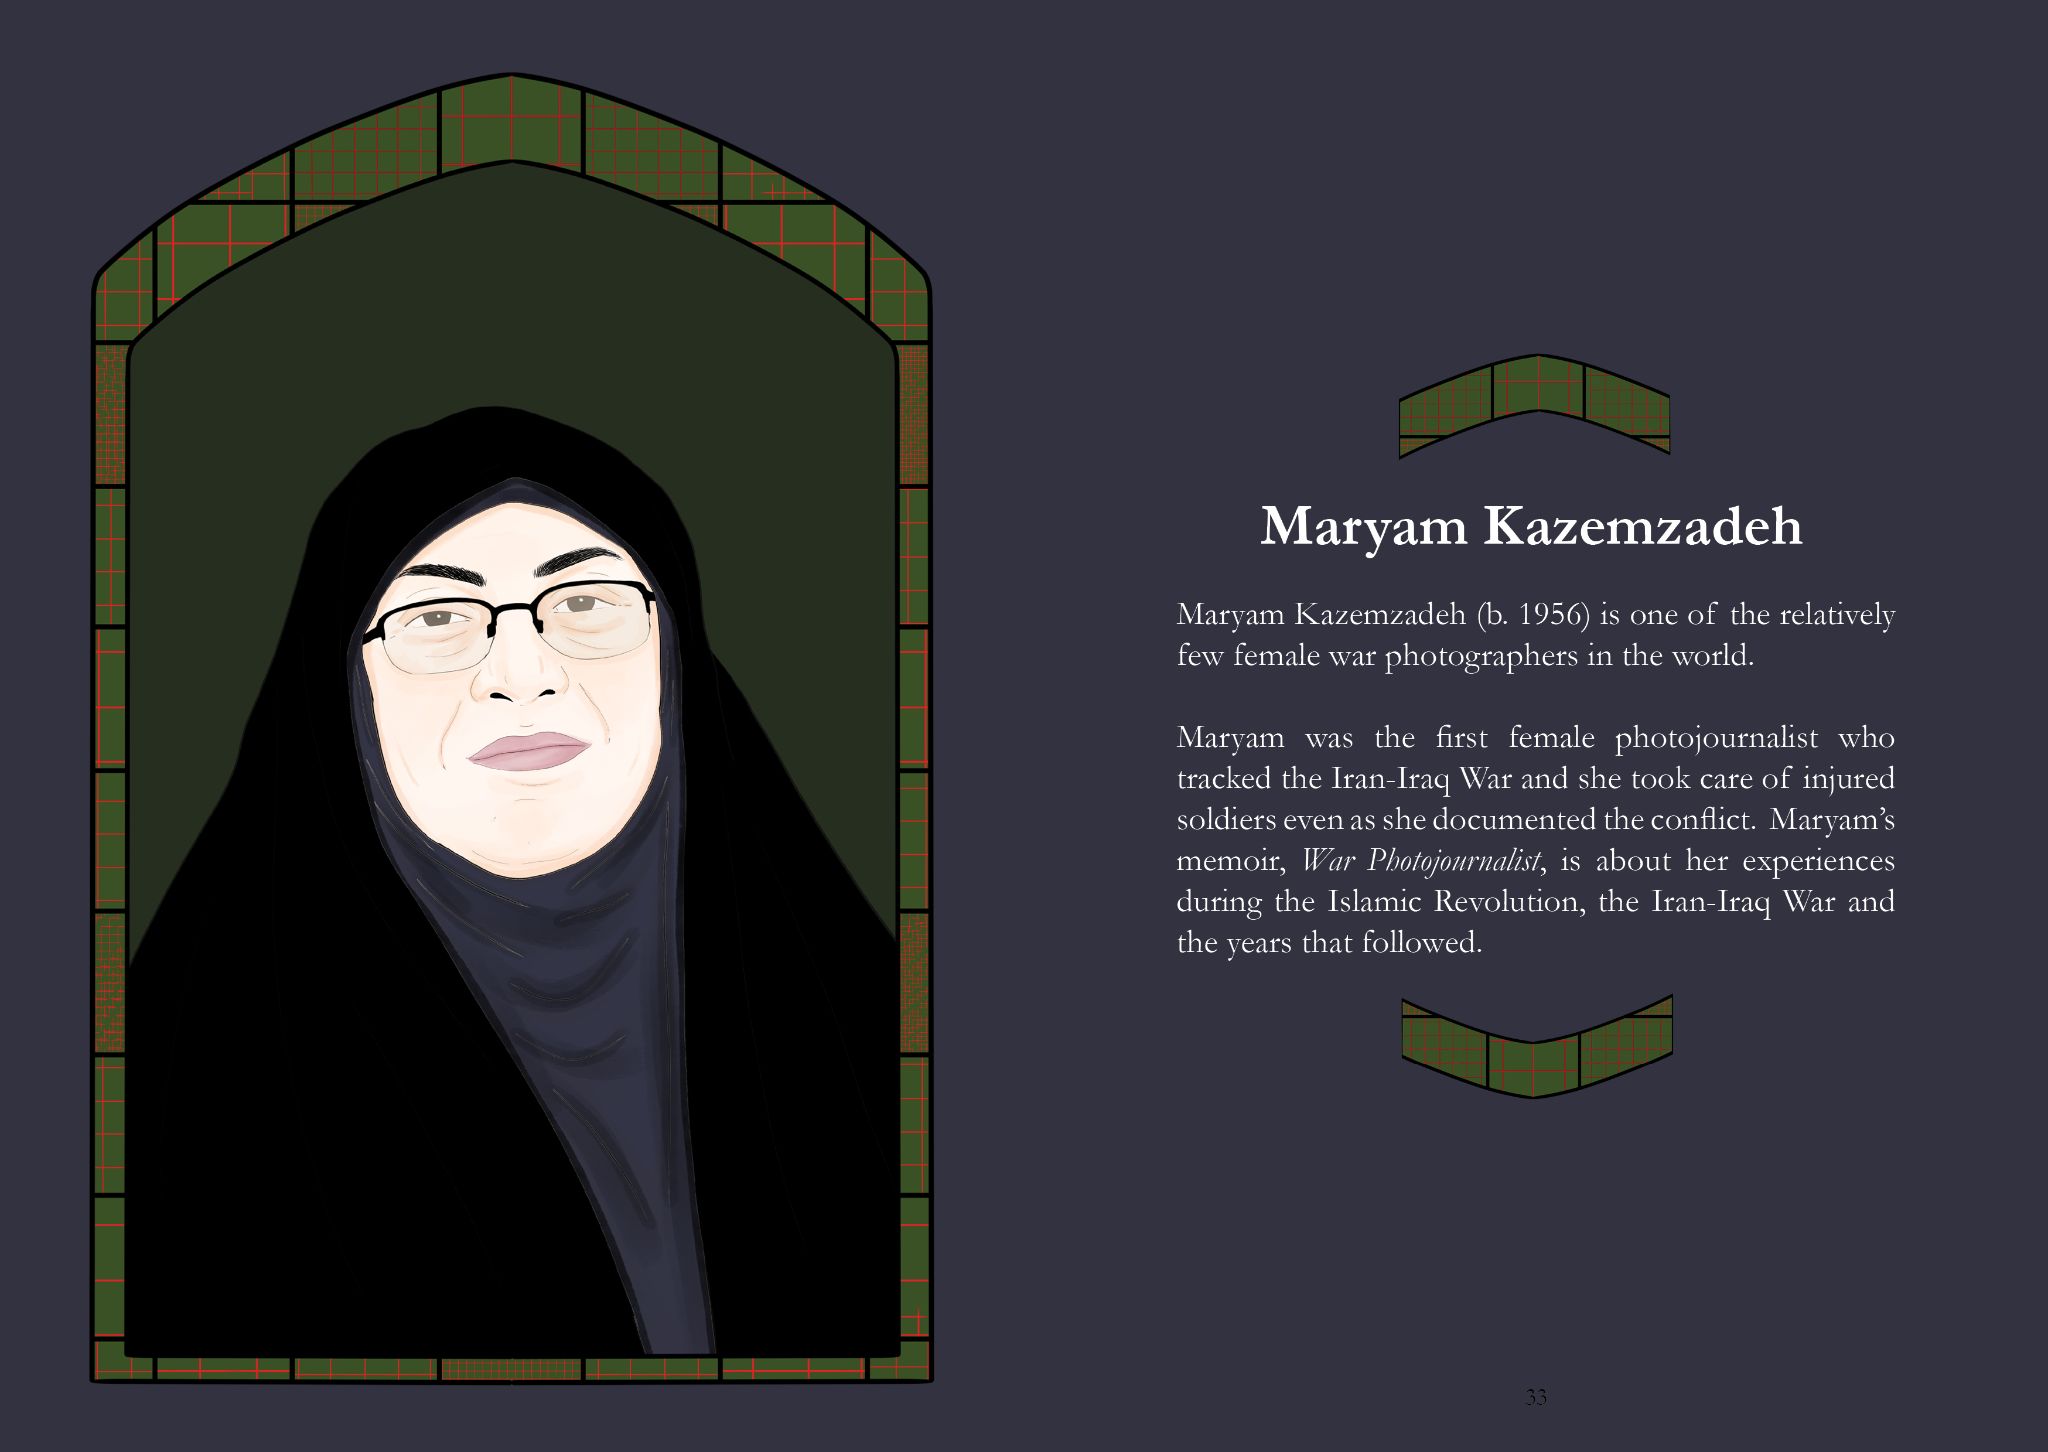 Maryam Kazemzadeh is a veteran war photographer and made her name from her work in the 1980s Iran-Iraq war